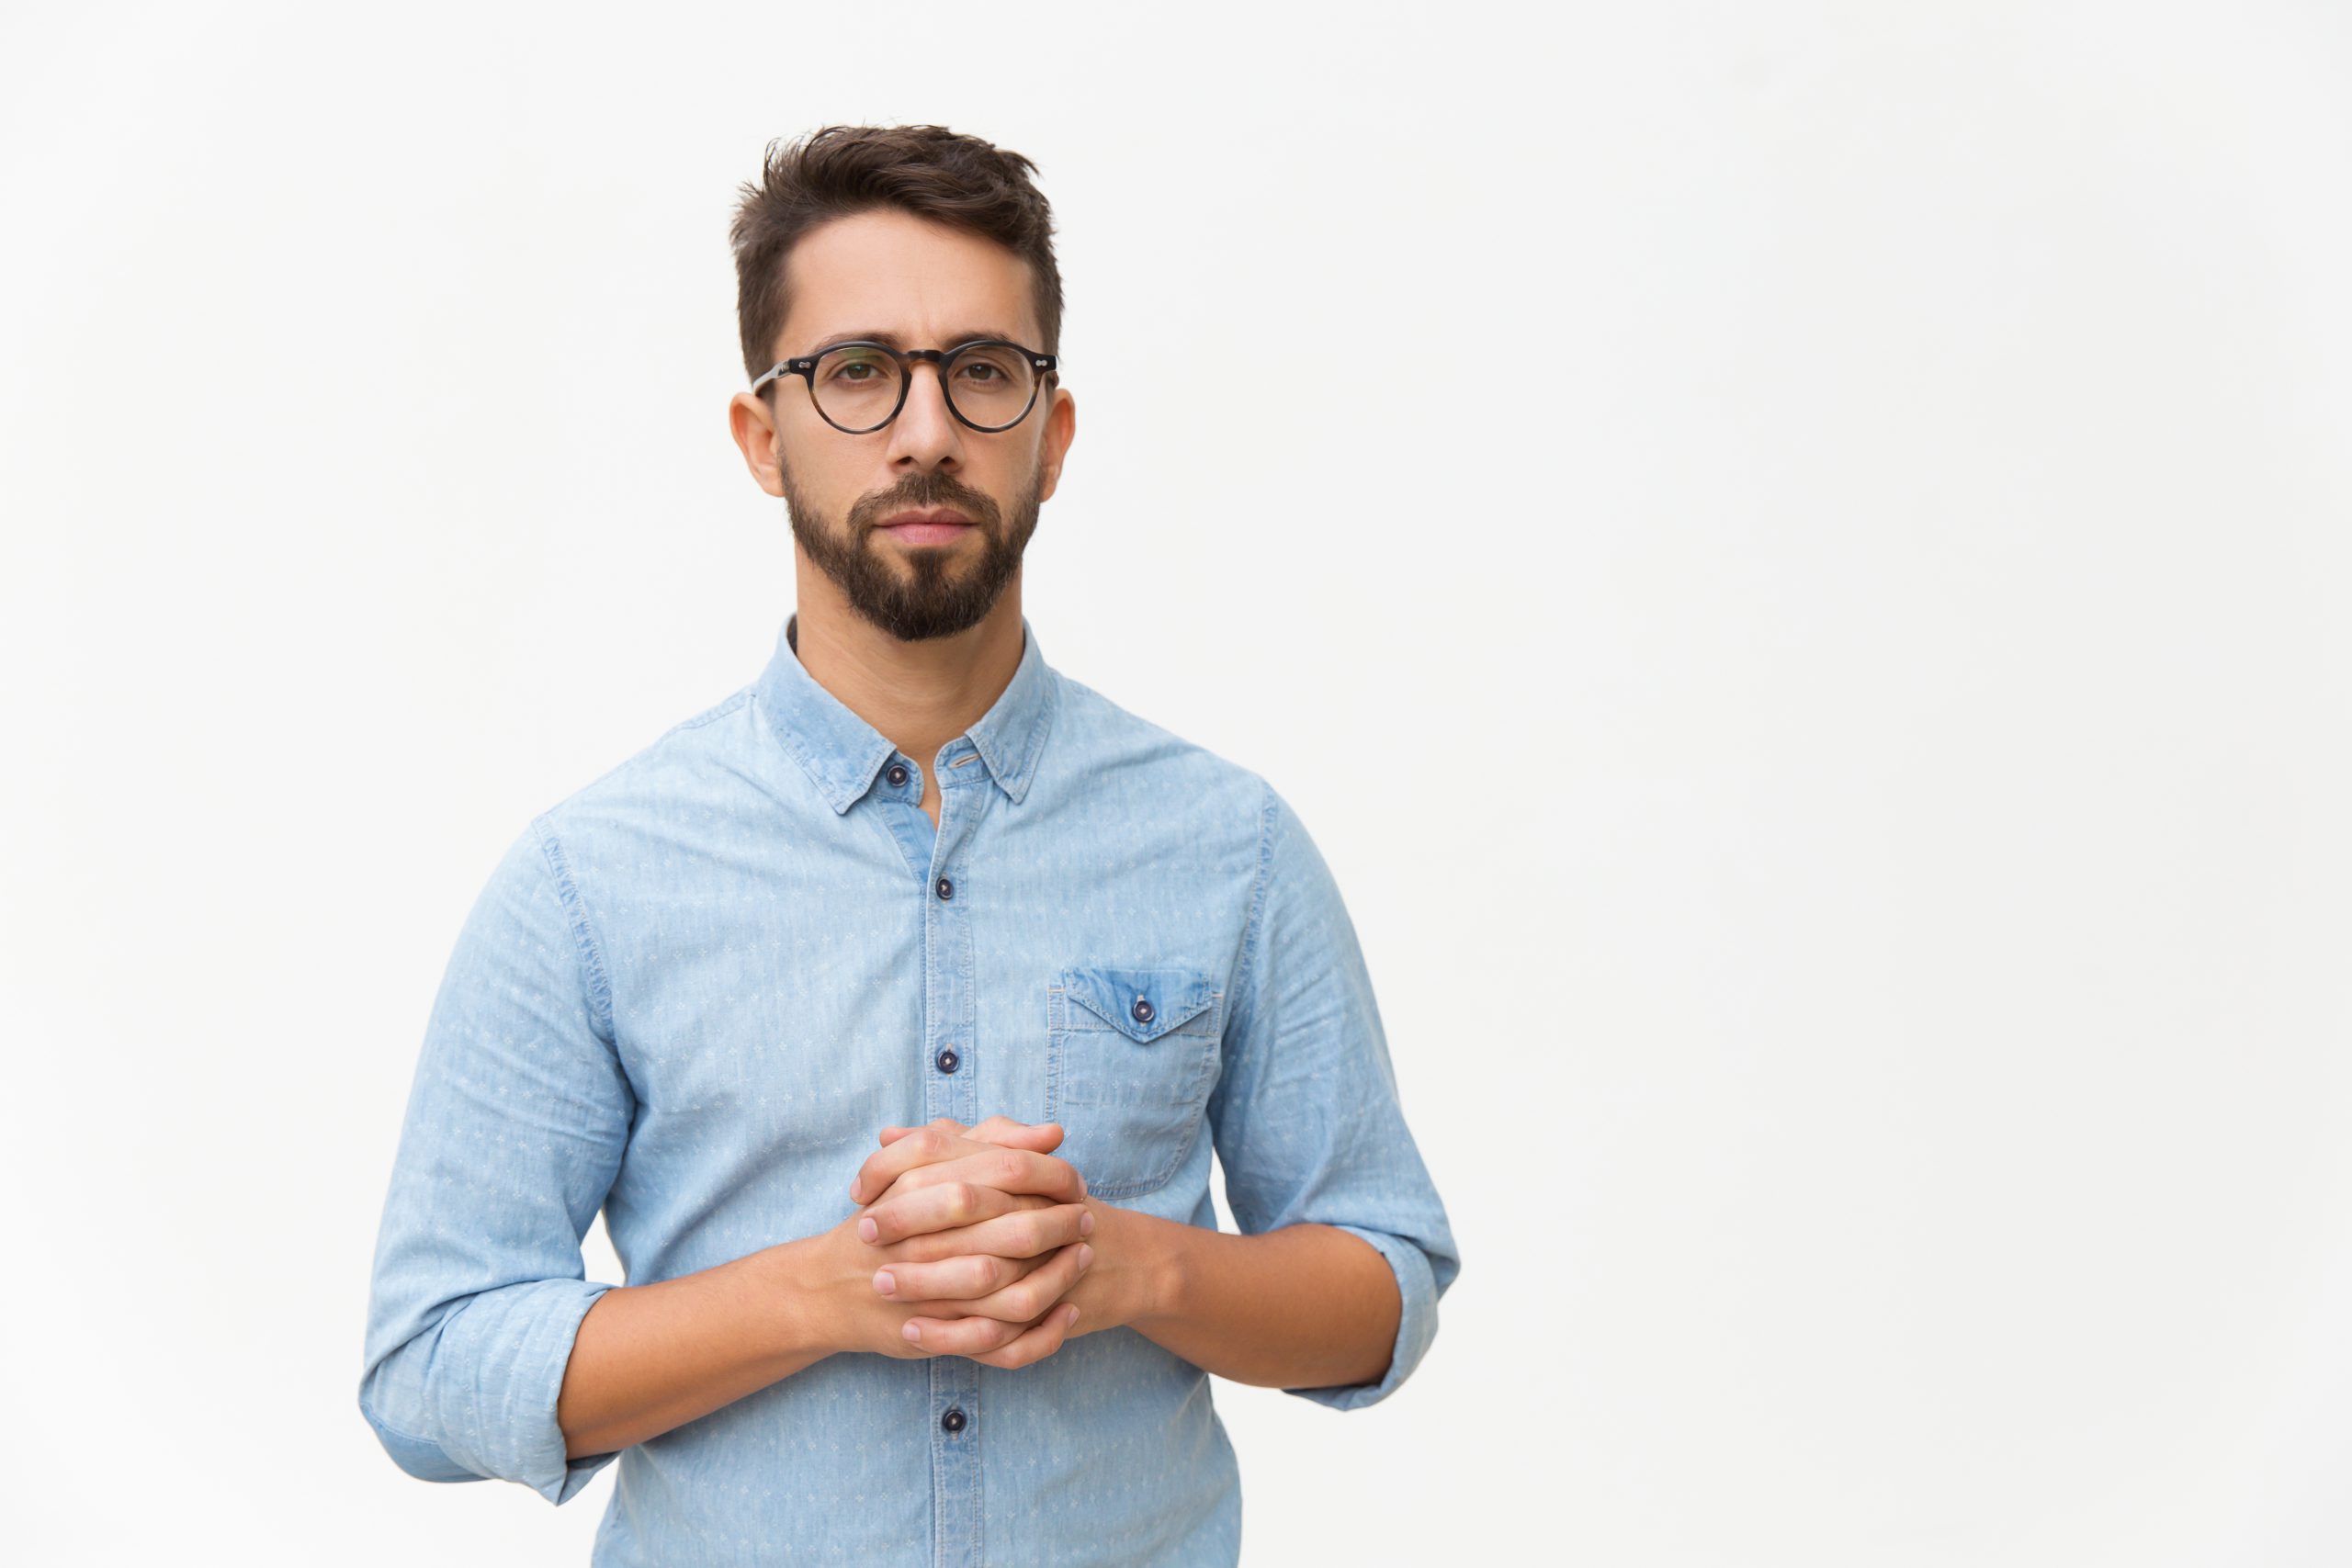 Front of serious confident man with clasped hands looking at camera. Handsome young man in casual shirt and glasses standing isolated over white background. Male portrait concept